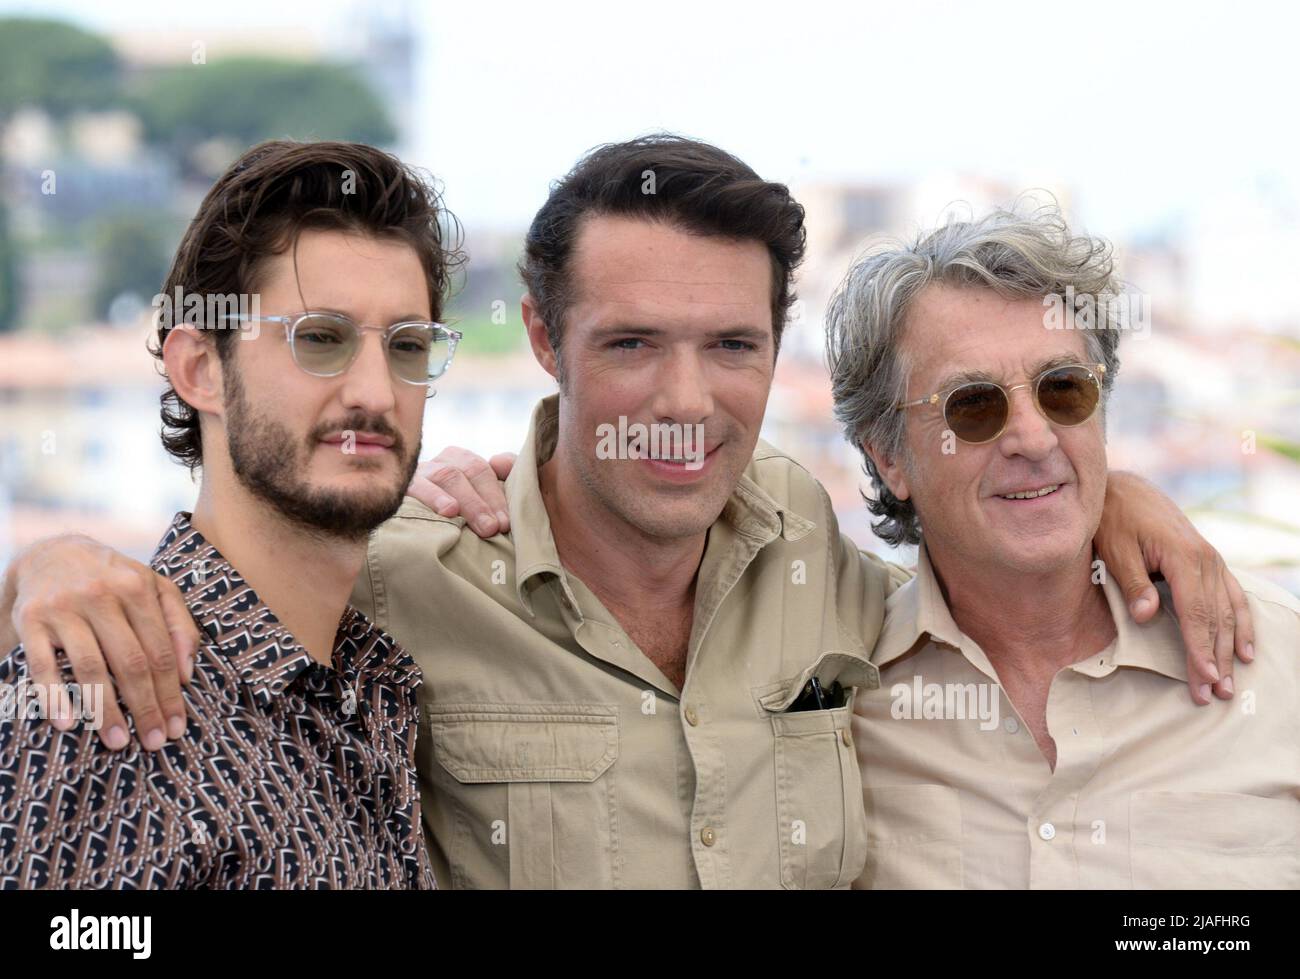 May 28, 2022, CANNES, France: CANNES, FRANCE - MAY 28: Pierre Niney, Nicolas Bedos and FranÃ§ois Cluzet attend the photocall for ''Mascarade'' during the 75th annual Cannes film festival at Palais des Festivals on May 28, 2022 in Cannes, France. (Credit Image: © Frederick Injimbert/ZUMA Press Wire) Stock Photo